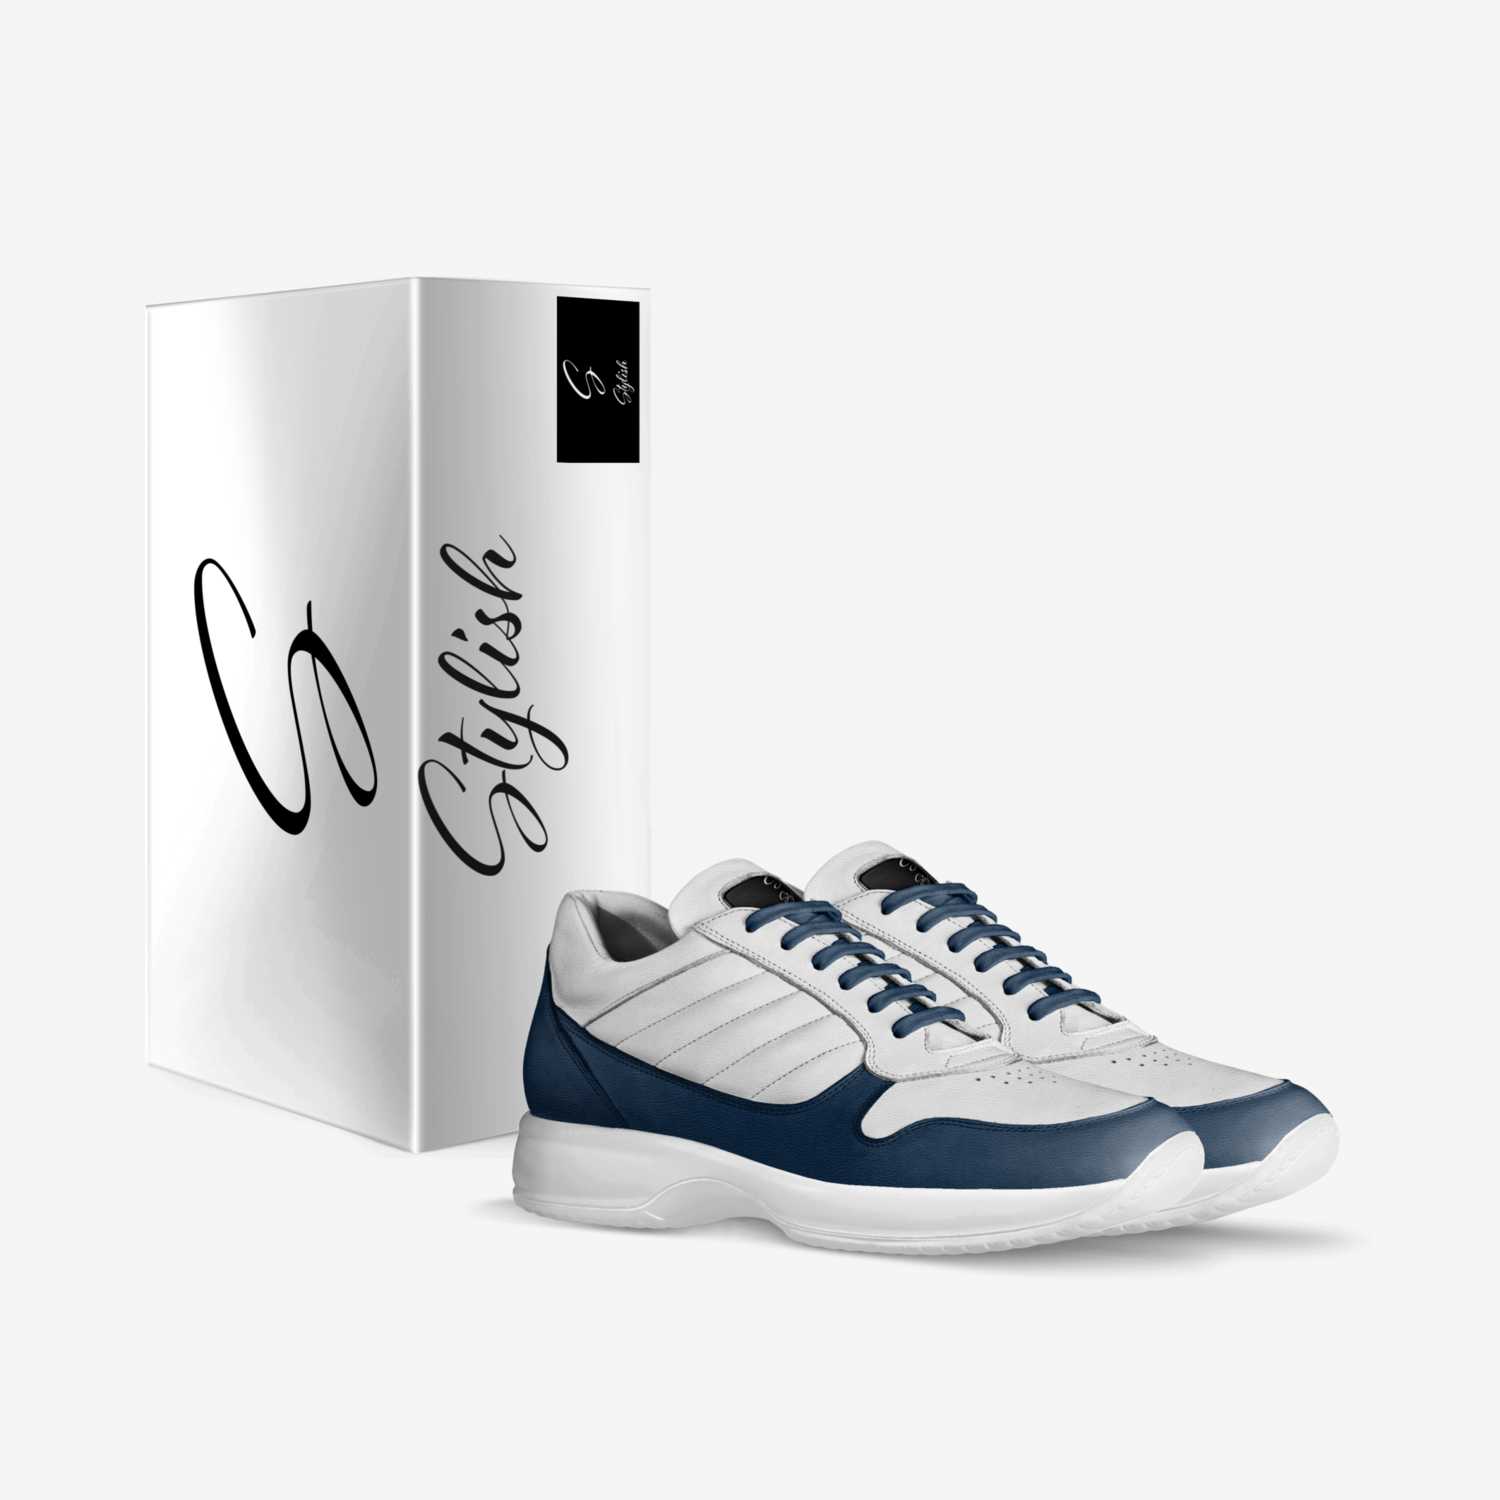 Stylish Wear custom made in Italy shoes by Wesley Loyd | Box view